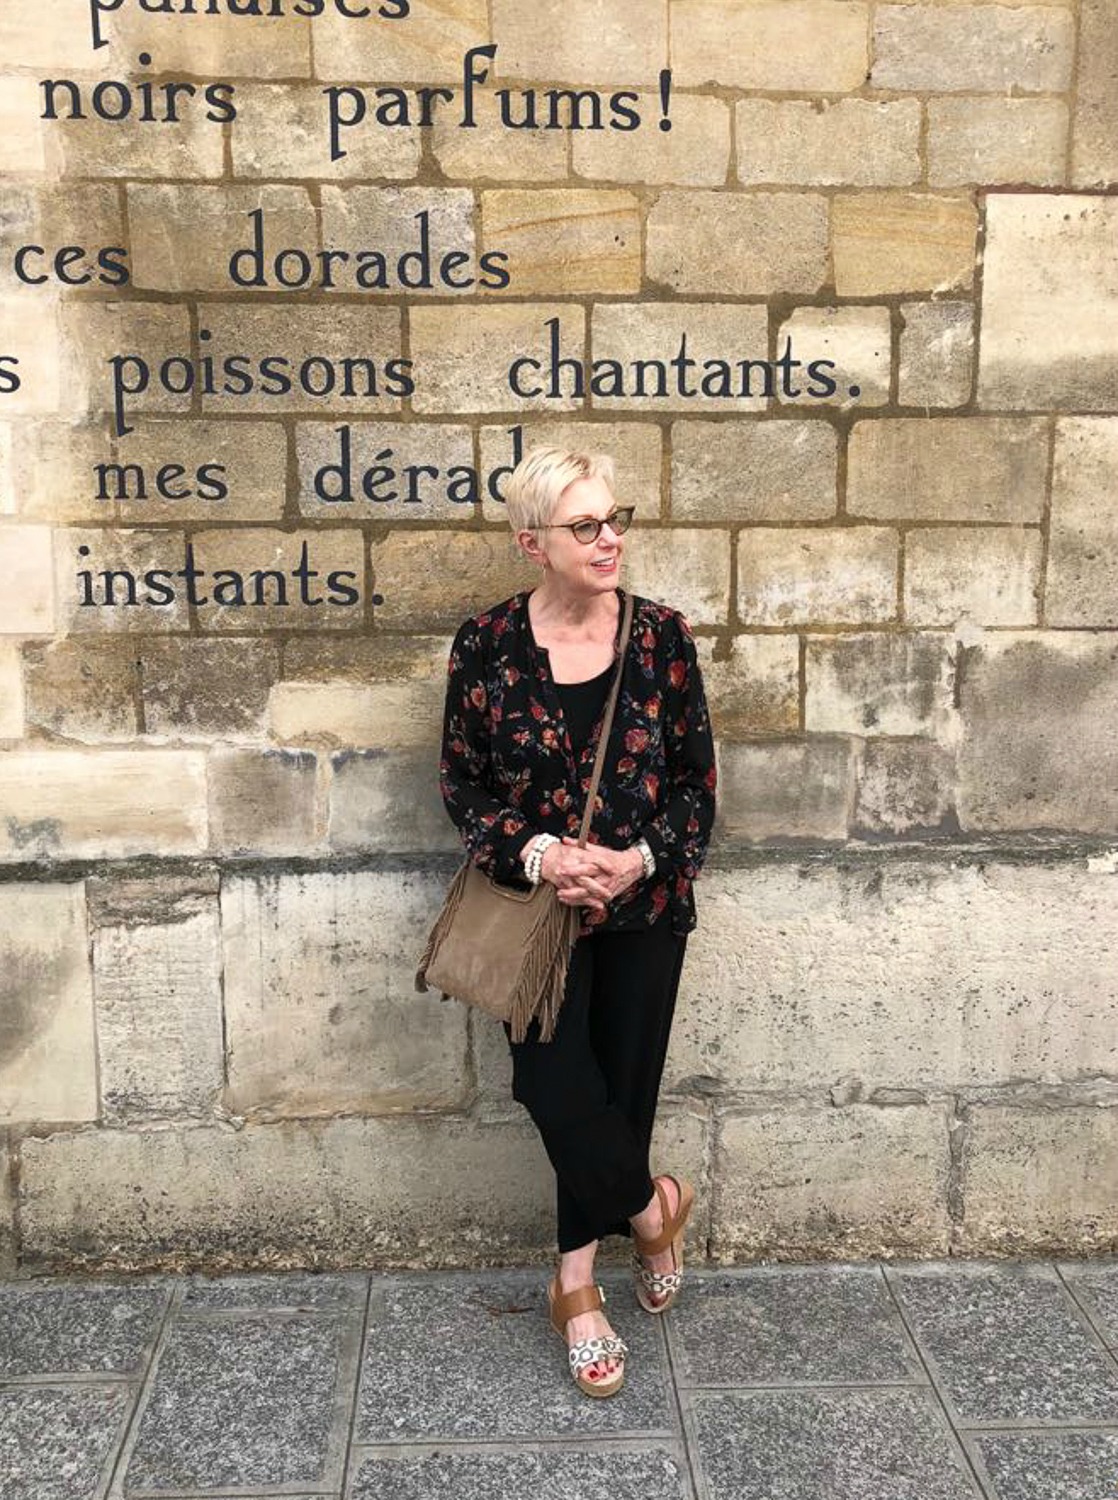 One of my favorite spots in St. Germain. Outfit details at une femme d'un certain age.